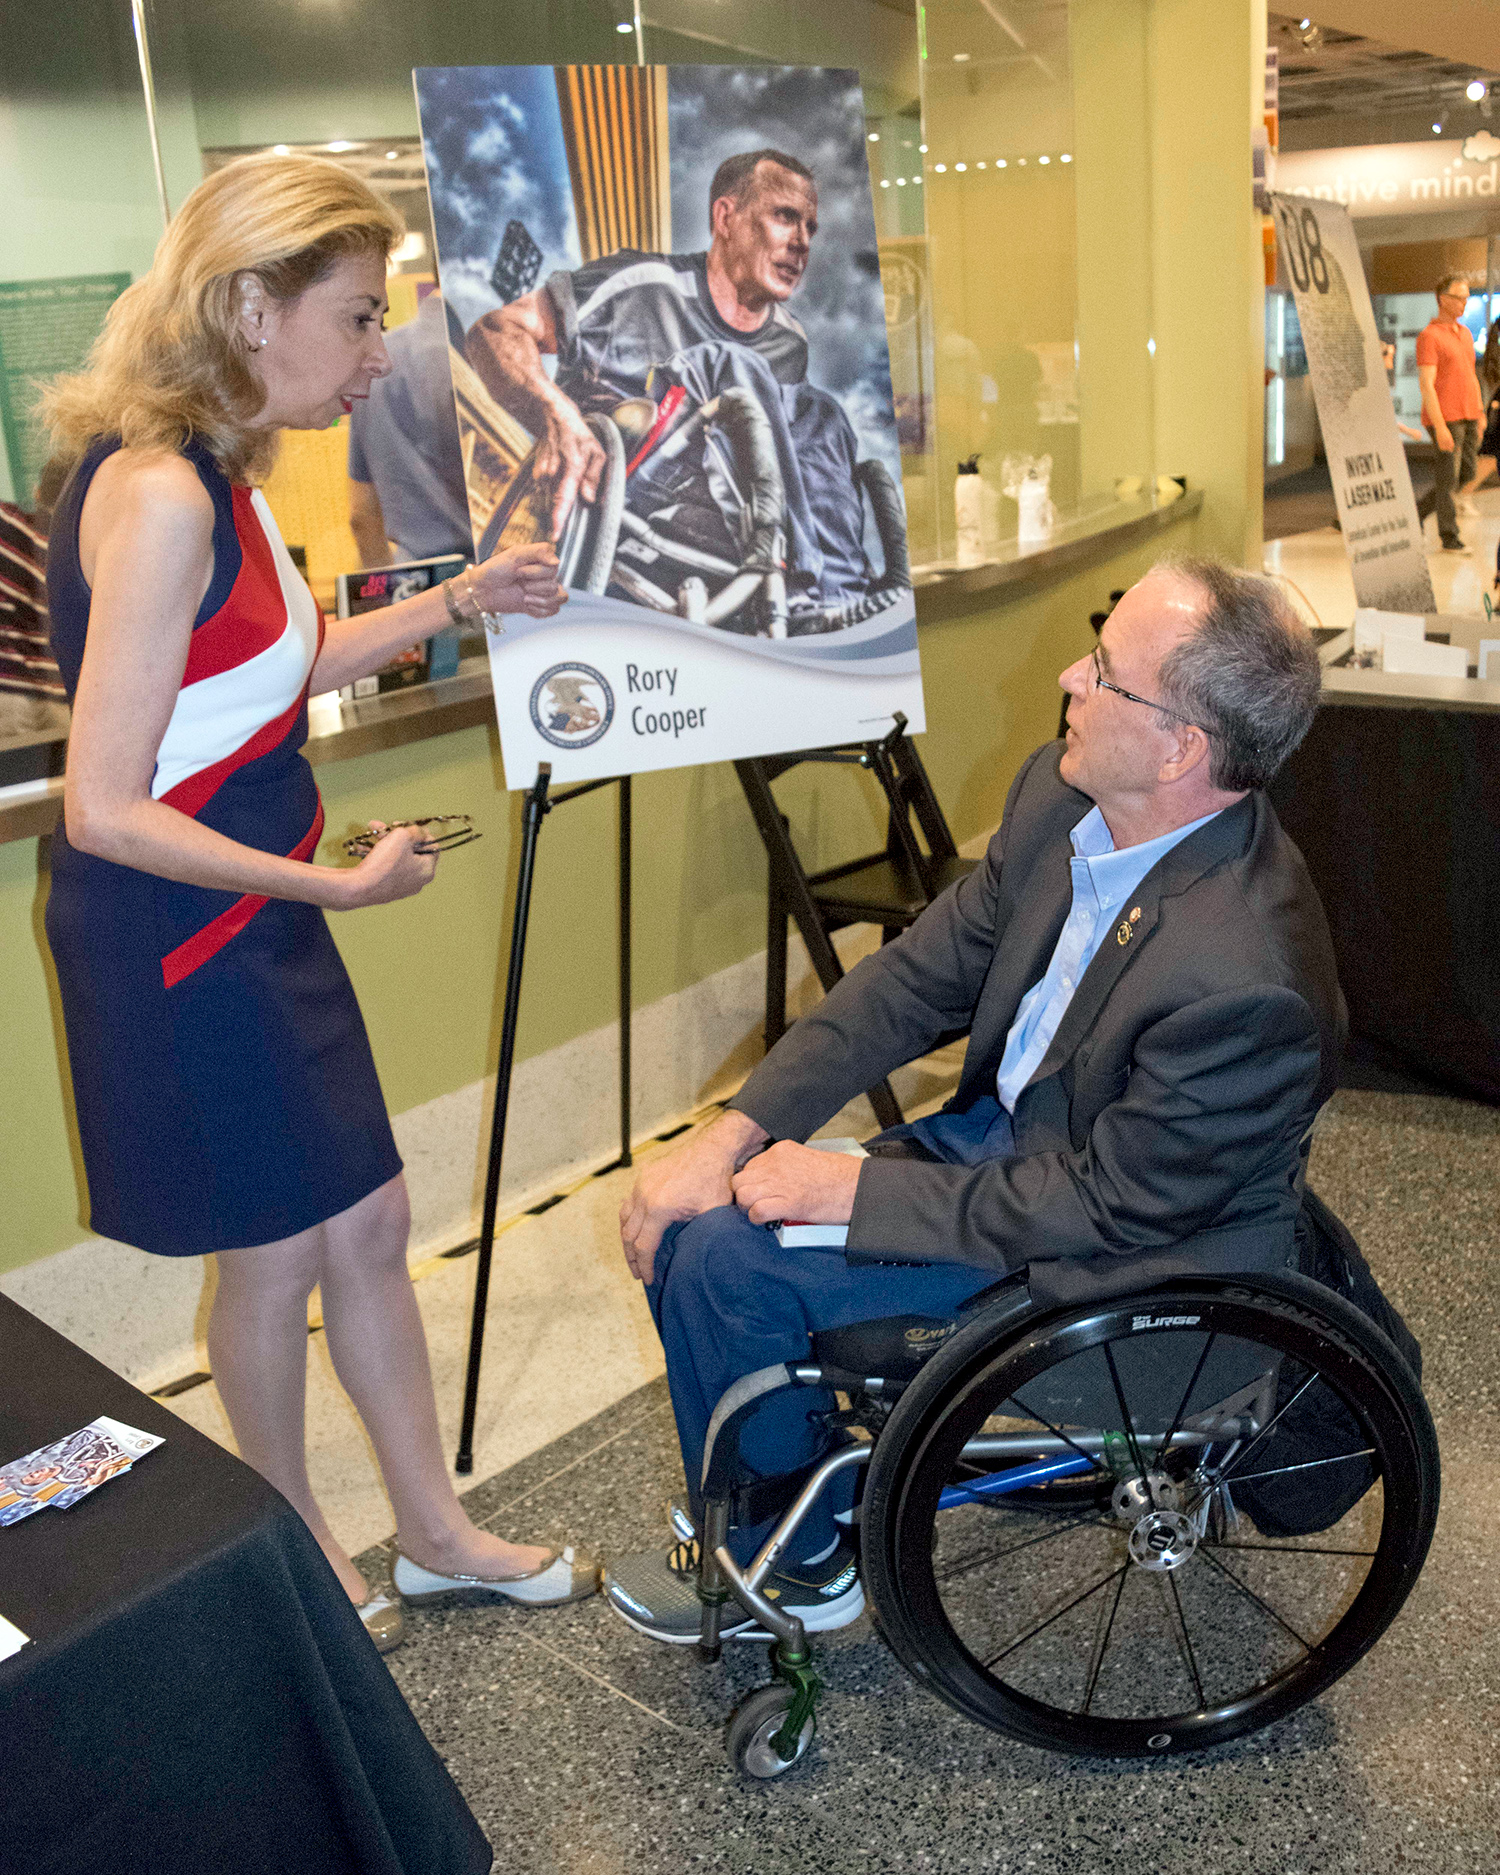 Deputy Director of the USPTO Laura Peter and Professor Rory Cooper(in wheelchair) with a blown up copy of his inventor trading card at his inventor trading card unveiling